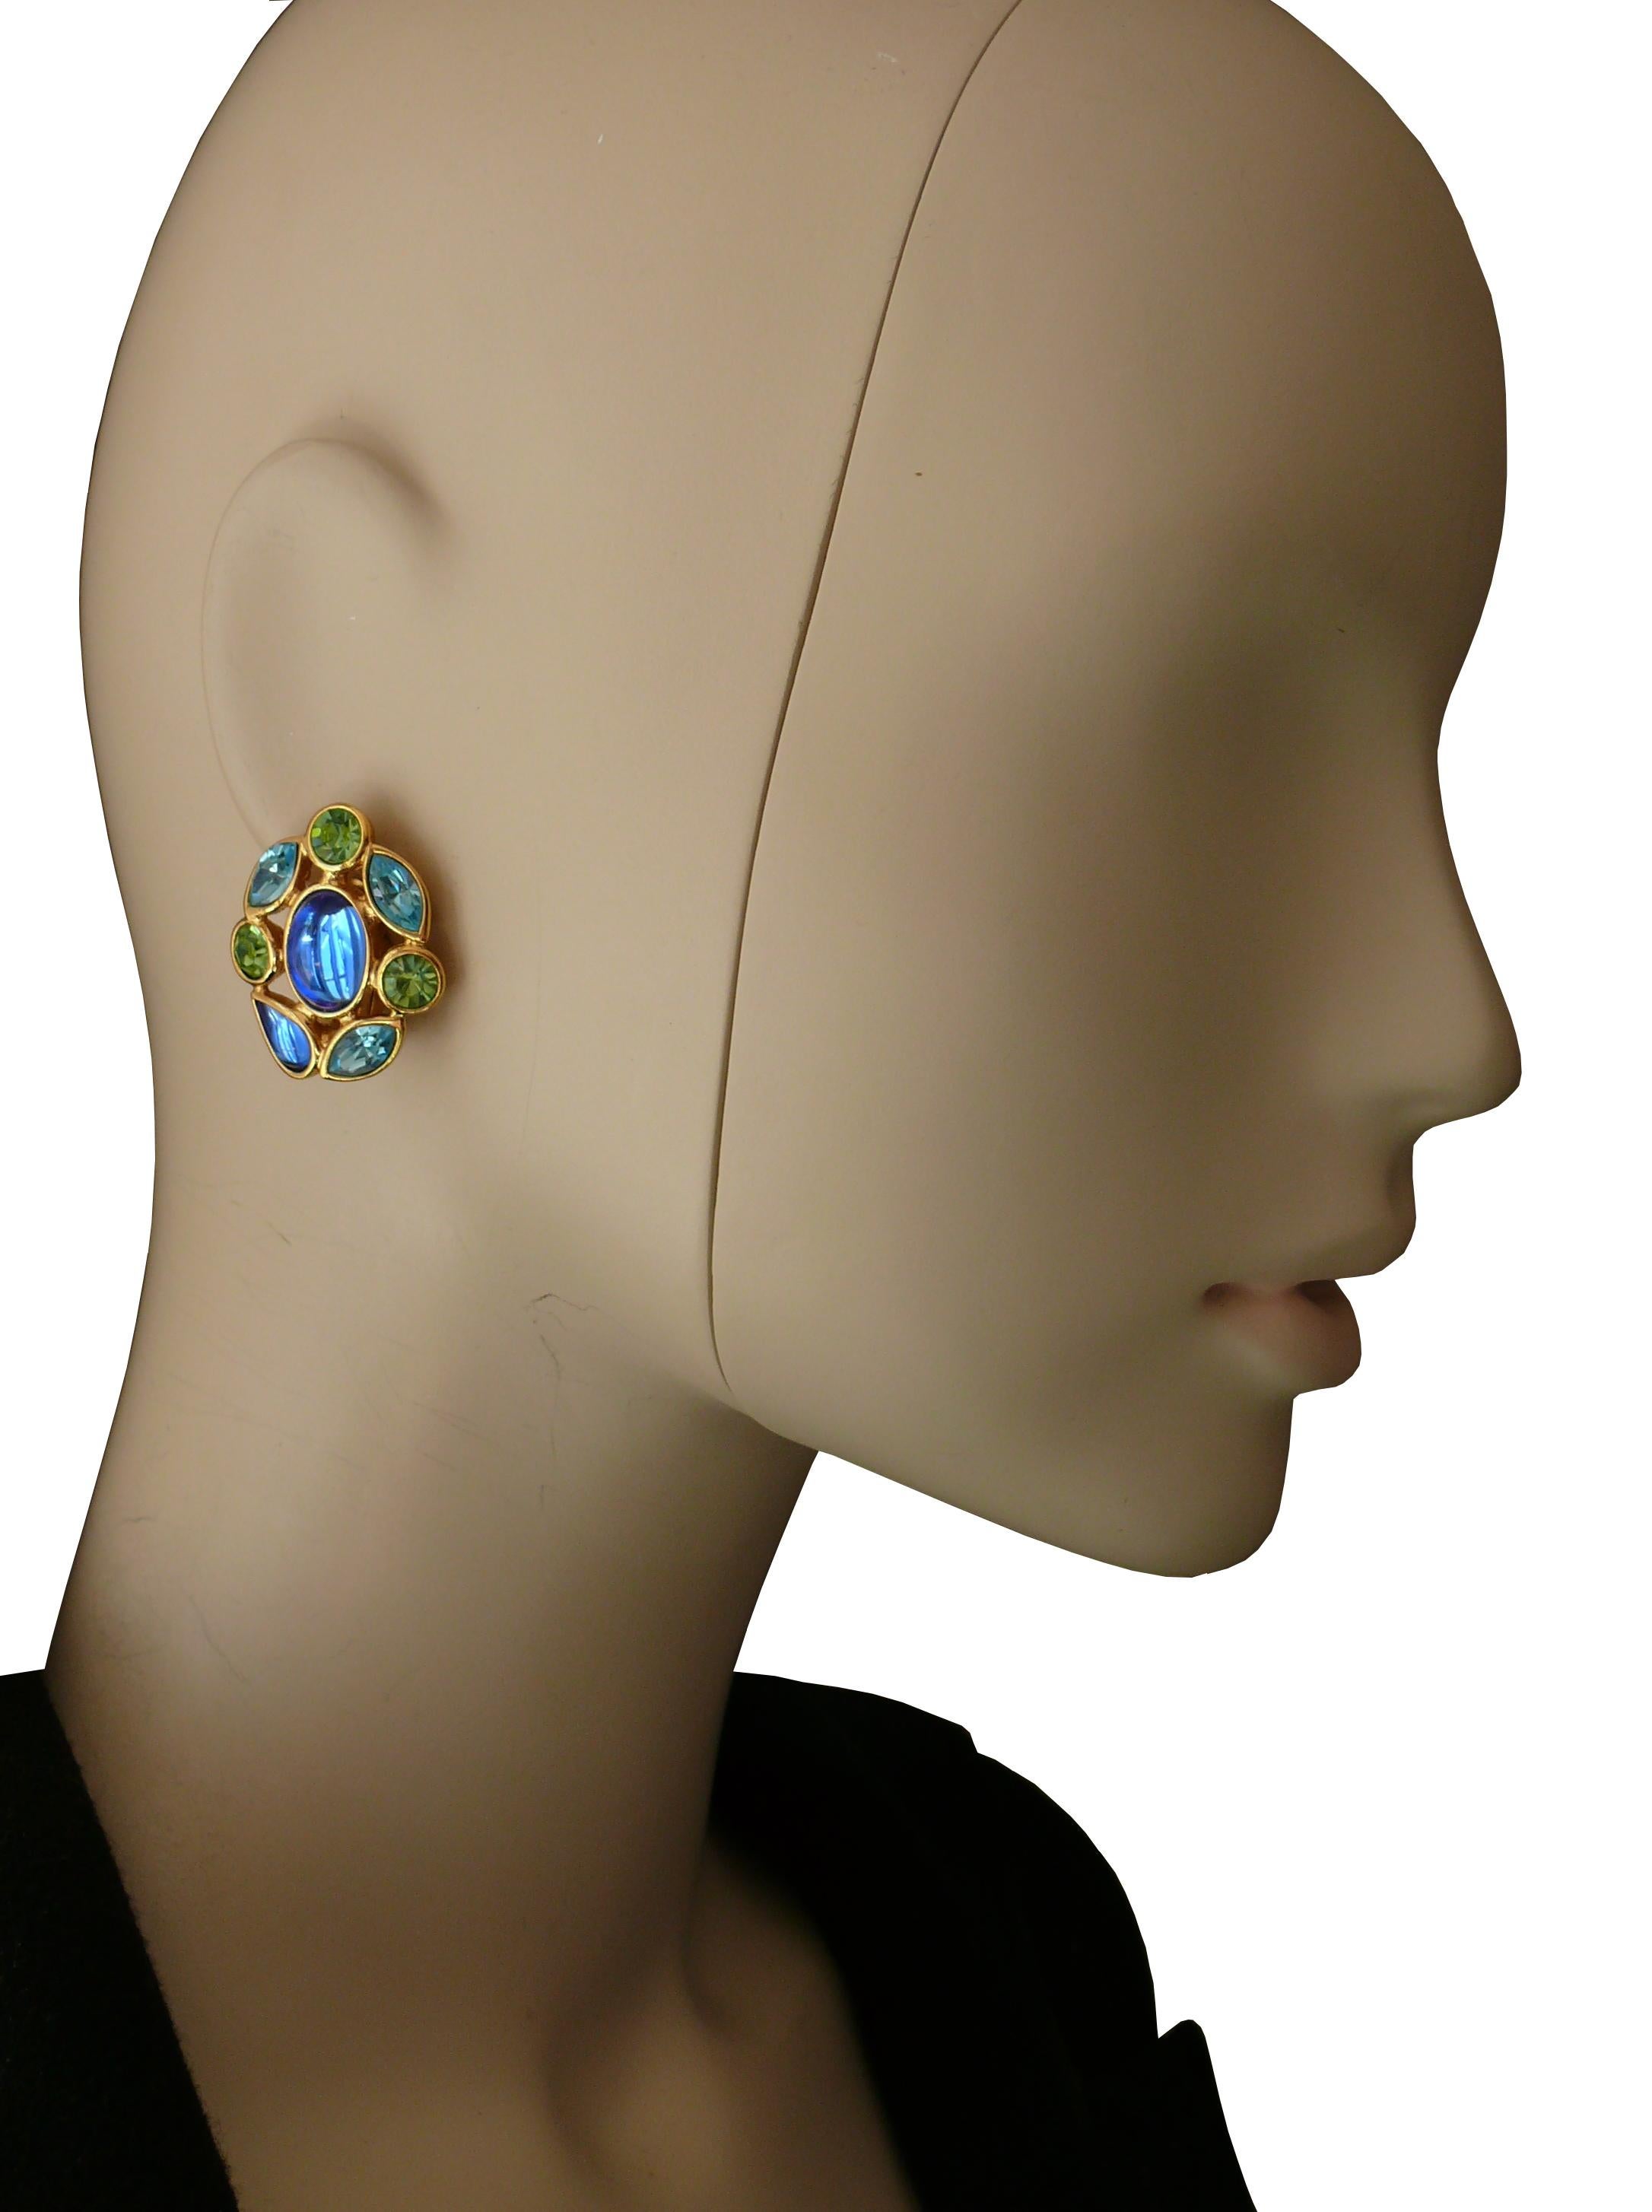 YVES SAINT LAURENT vintage gold toned clip-on earrings featuring a blue glass cabochon center and multicolored crystals.

Embossed YSL Made in France.

Indicative measurements : approx. 3.2 cm (1.26 inches) x 2.6 cm (1.02 inches).

NOTES
- This is a